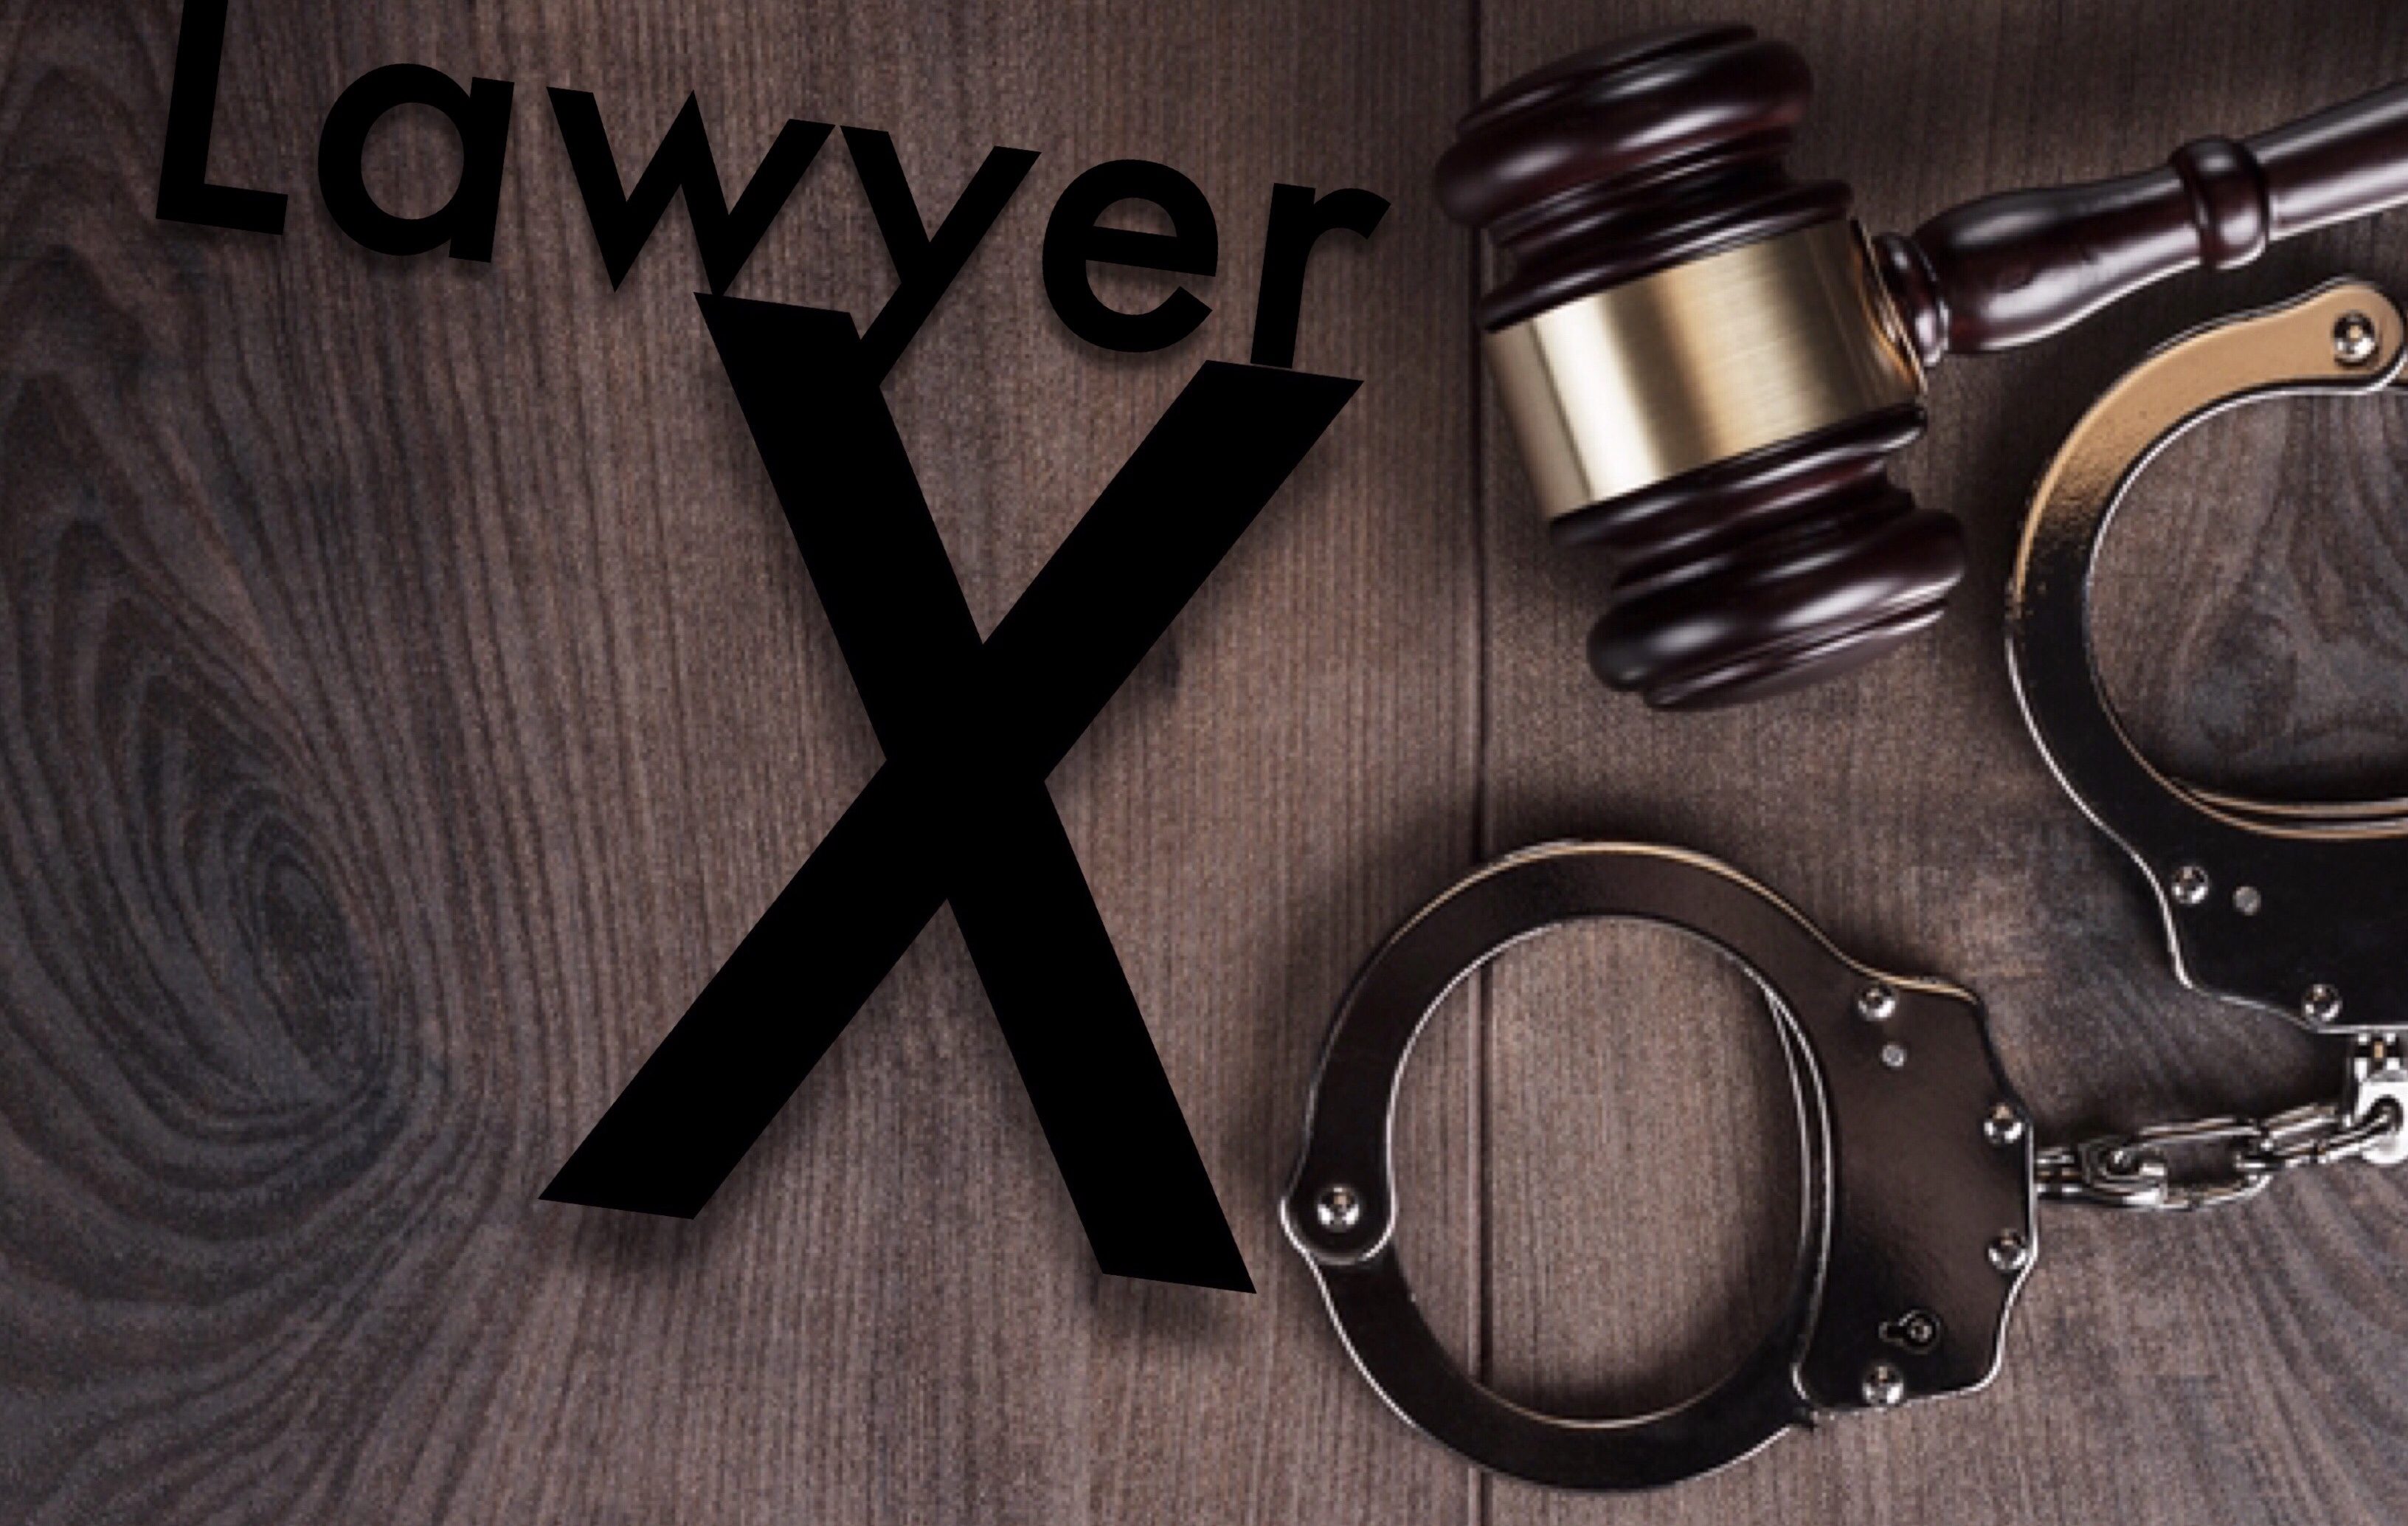 The story of Lawyer X – The lawyer and informant who turned on her clients